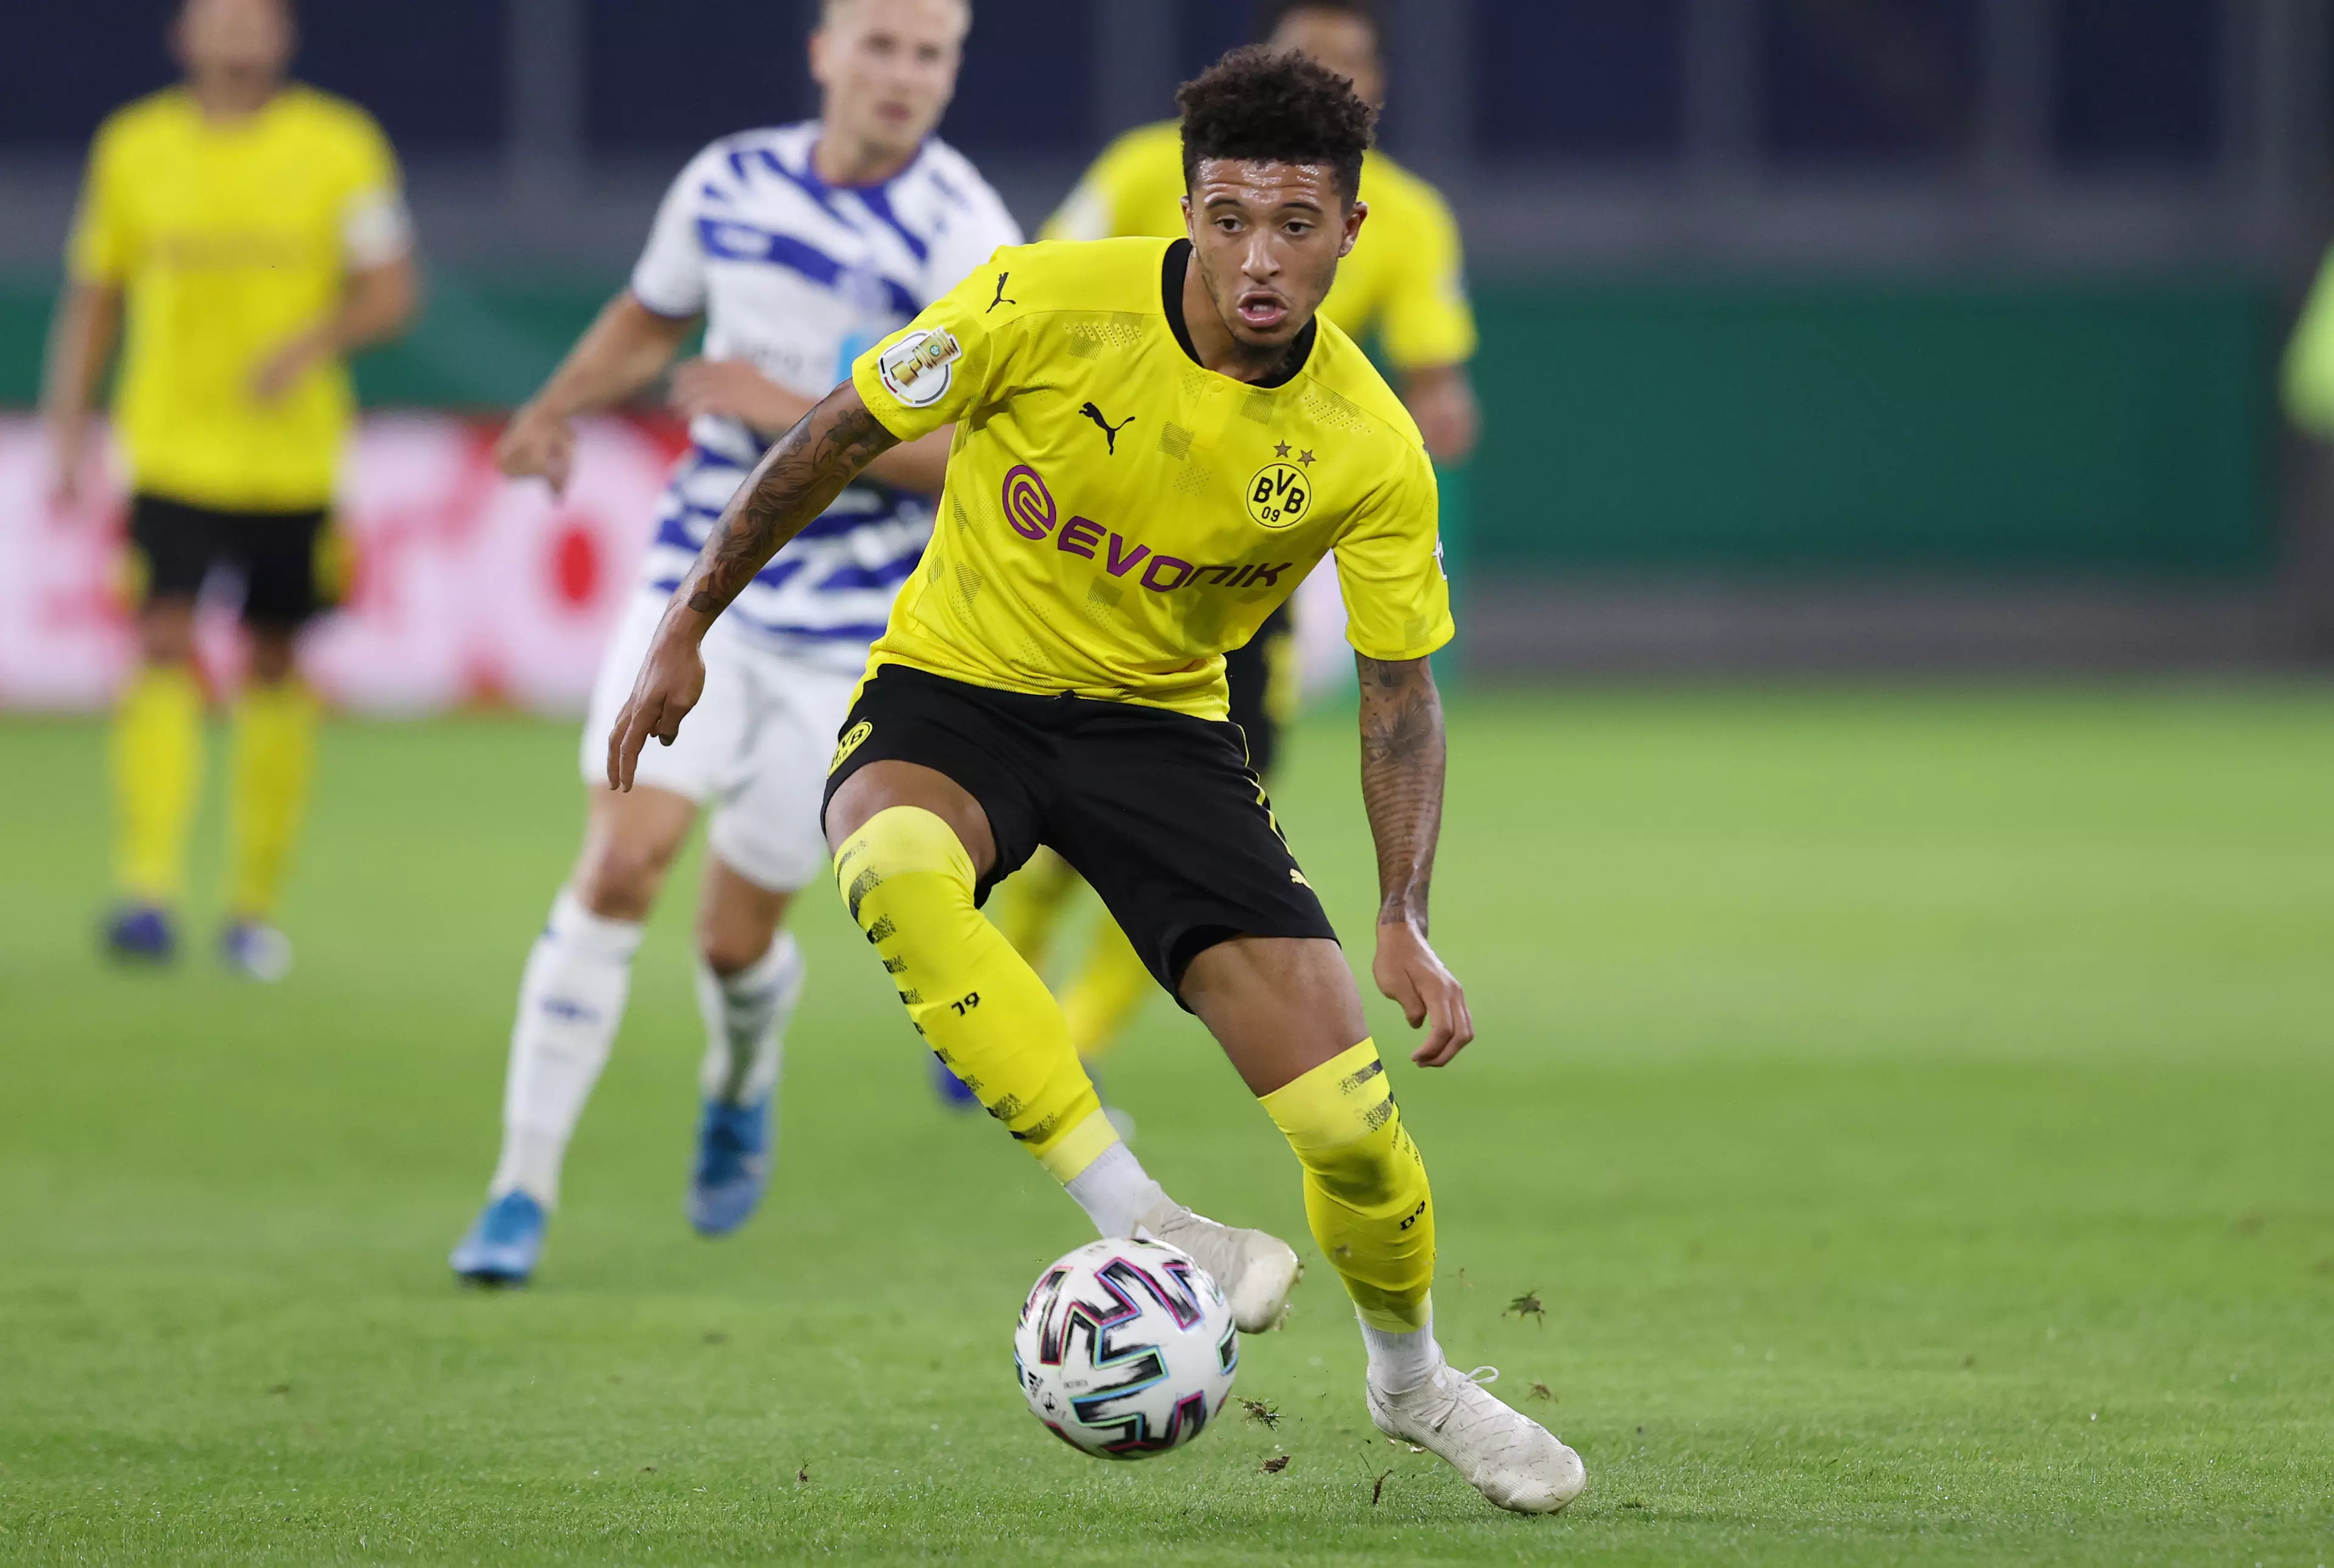 Sancho has already played in a German Cup game for Dortmund this season. Image: PA Images